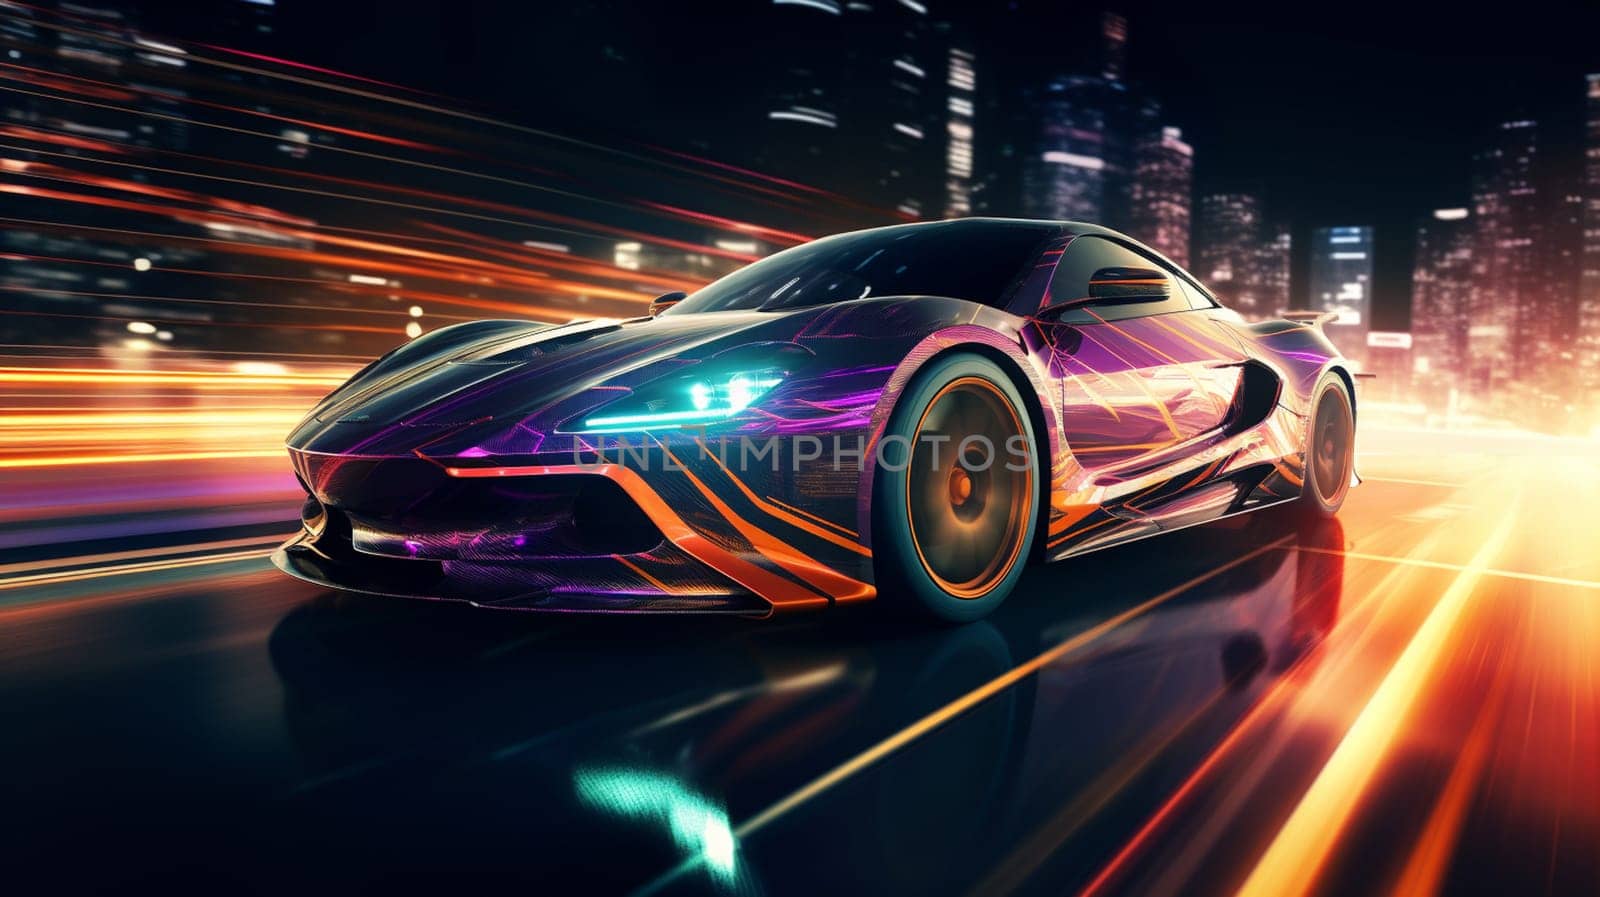 Futuristic Sports Car On Neon Highway. Powerful acceleration of a supercar on a night track with colorful lights and trails. 3d illustration by Andelov13